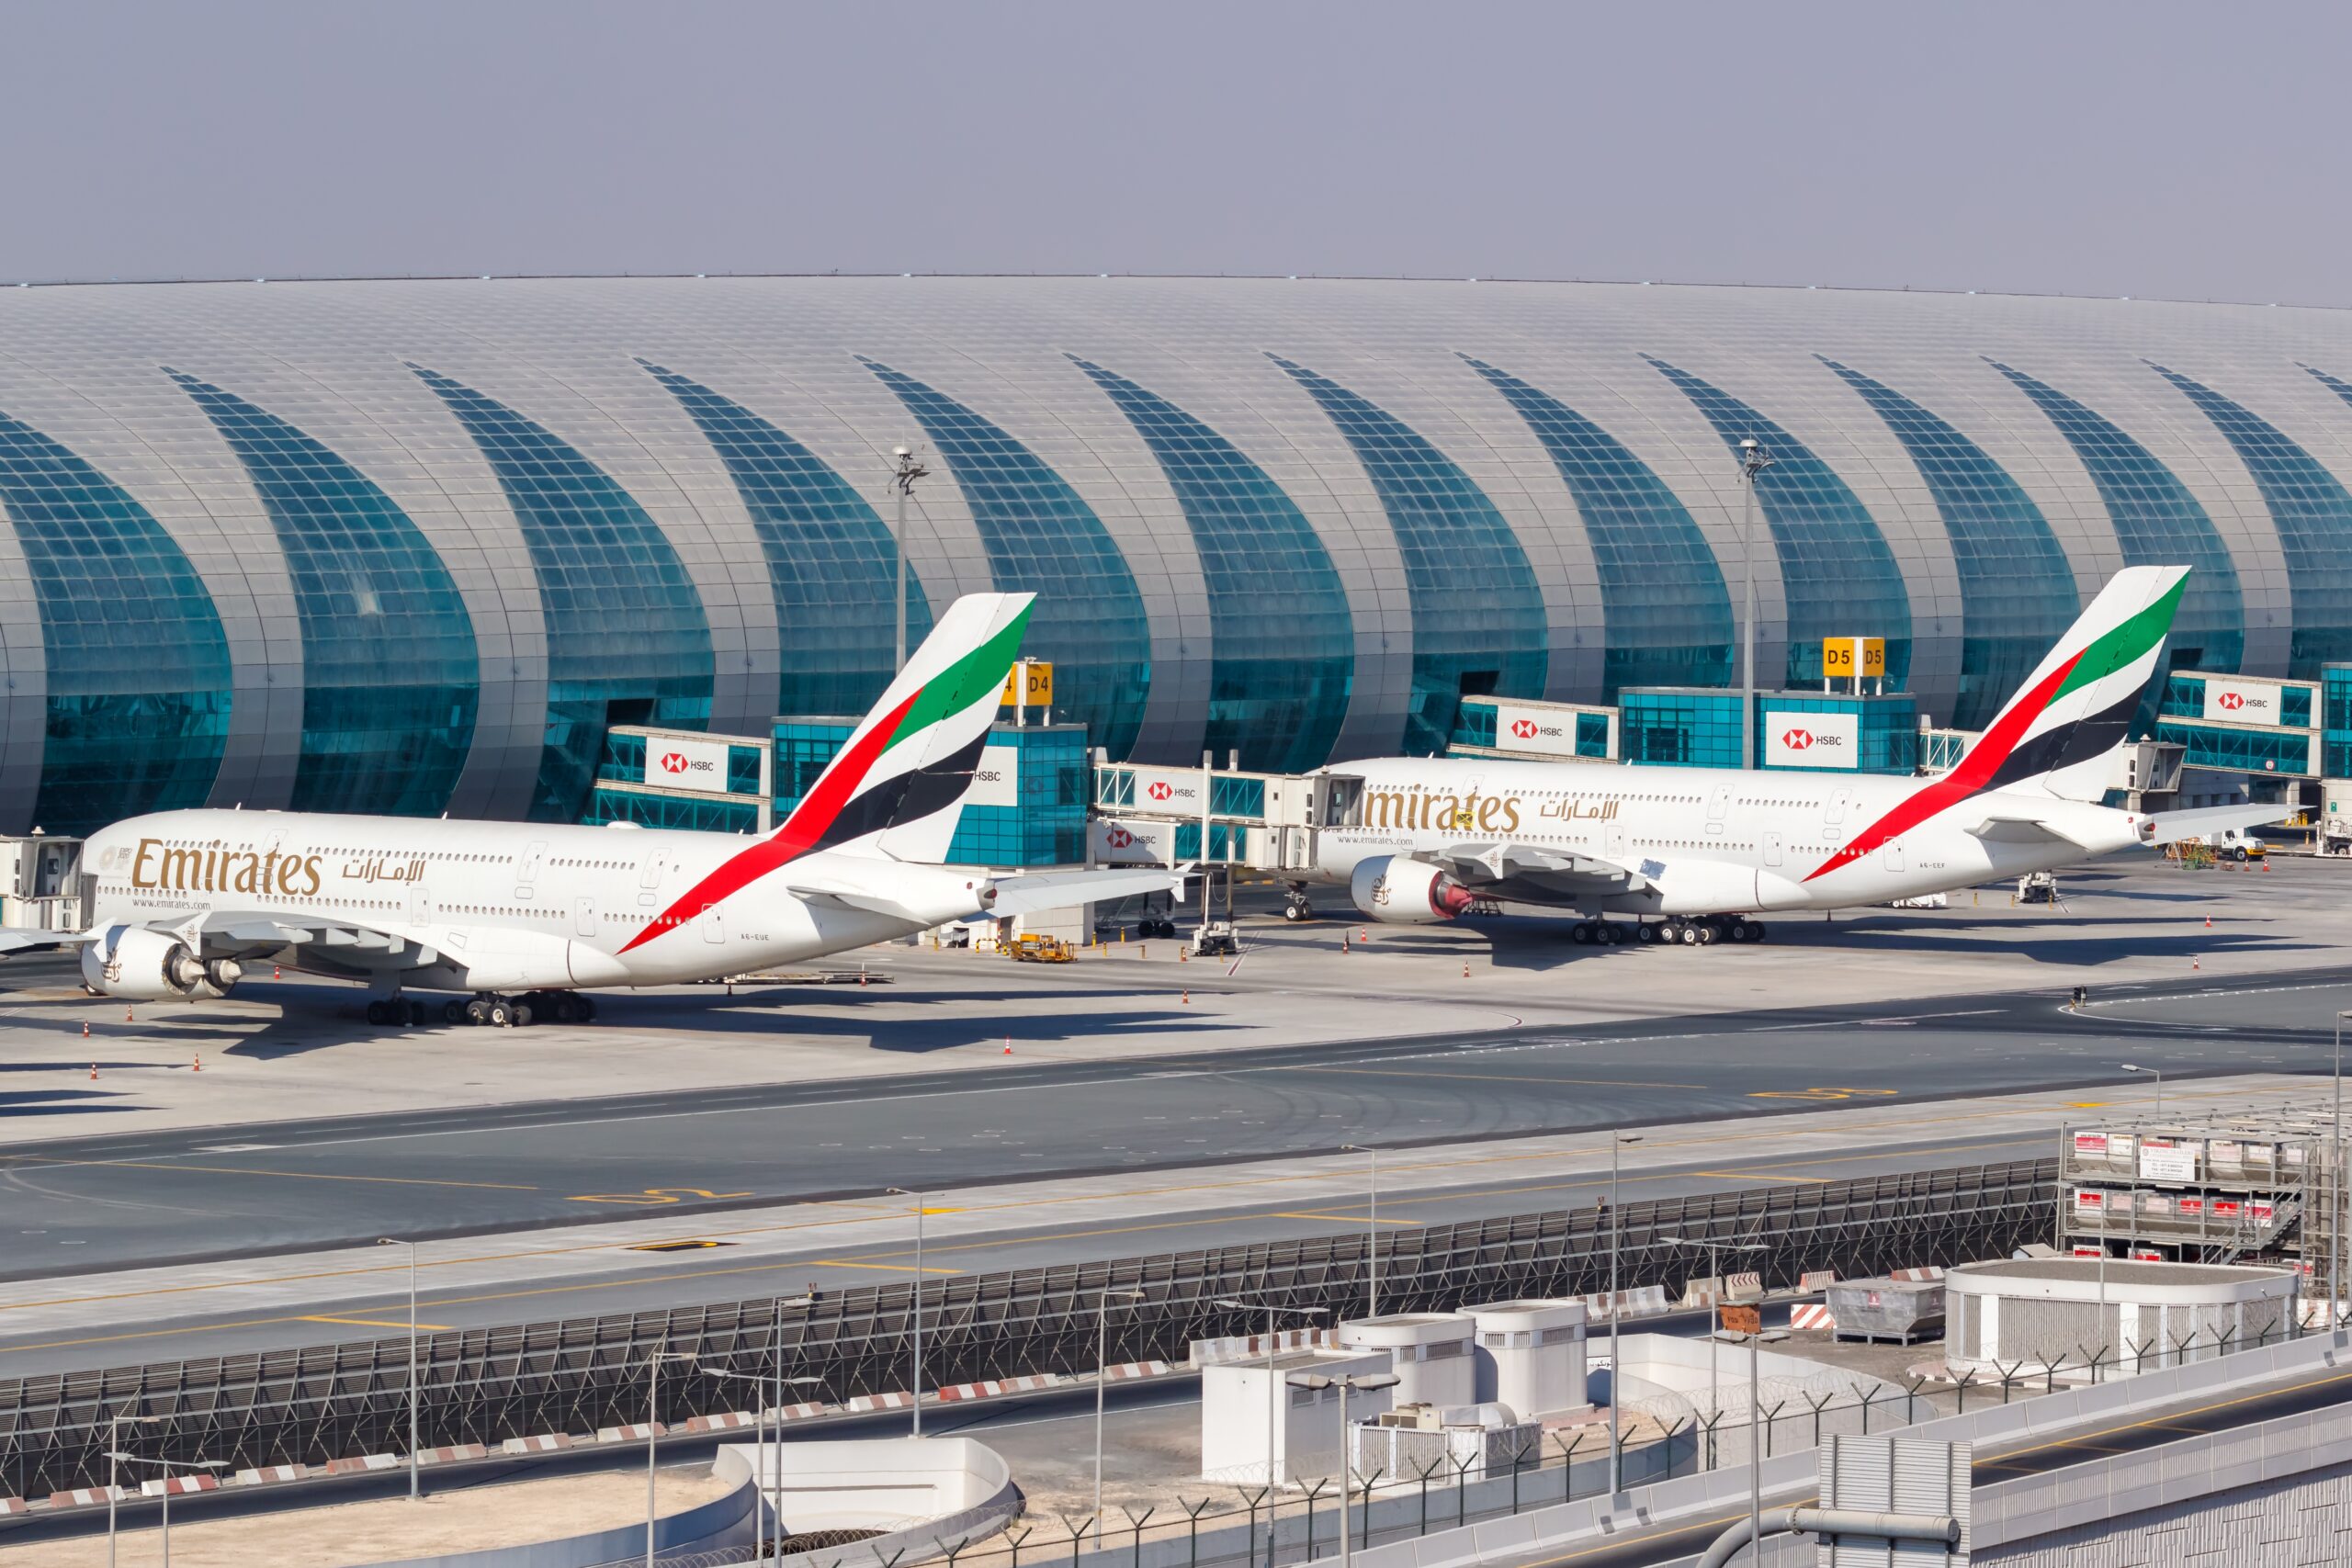 Dubai International Airport Offering Temporary Accommodation to Sudanese Travellers Stuck in Limbo After Flights Were Suspended